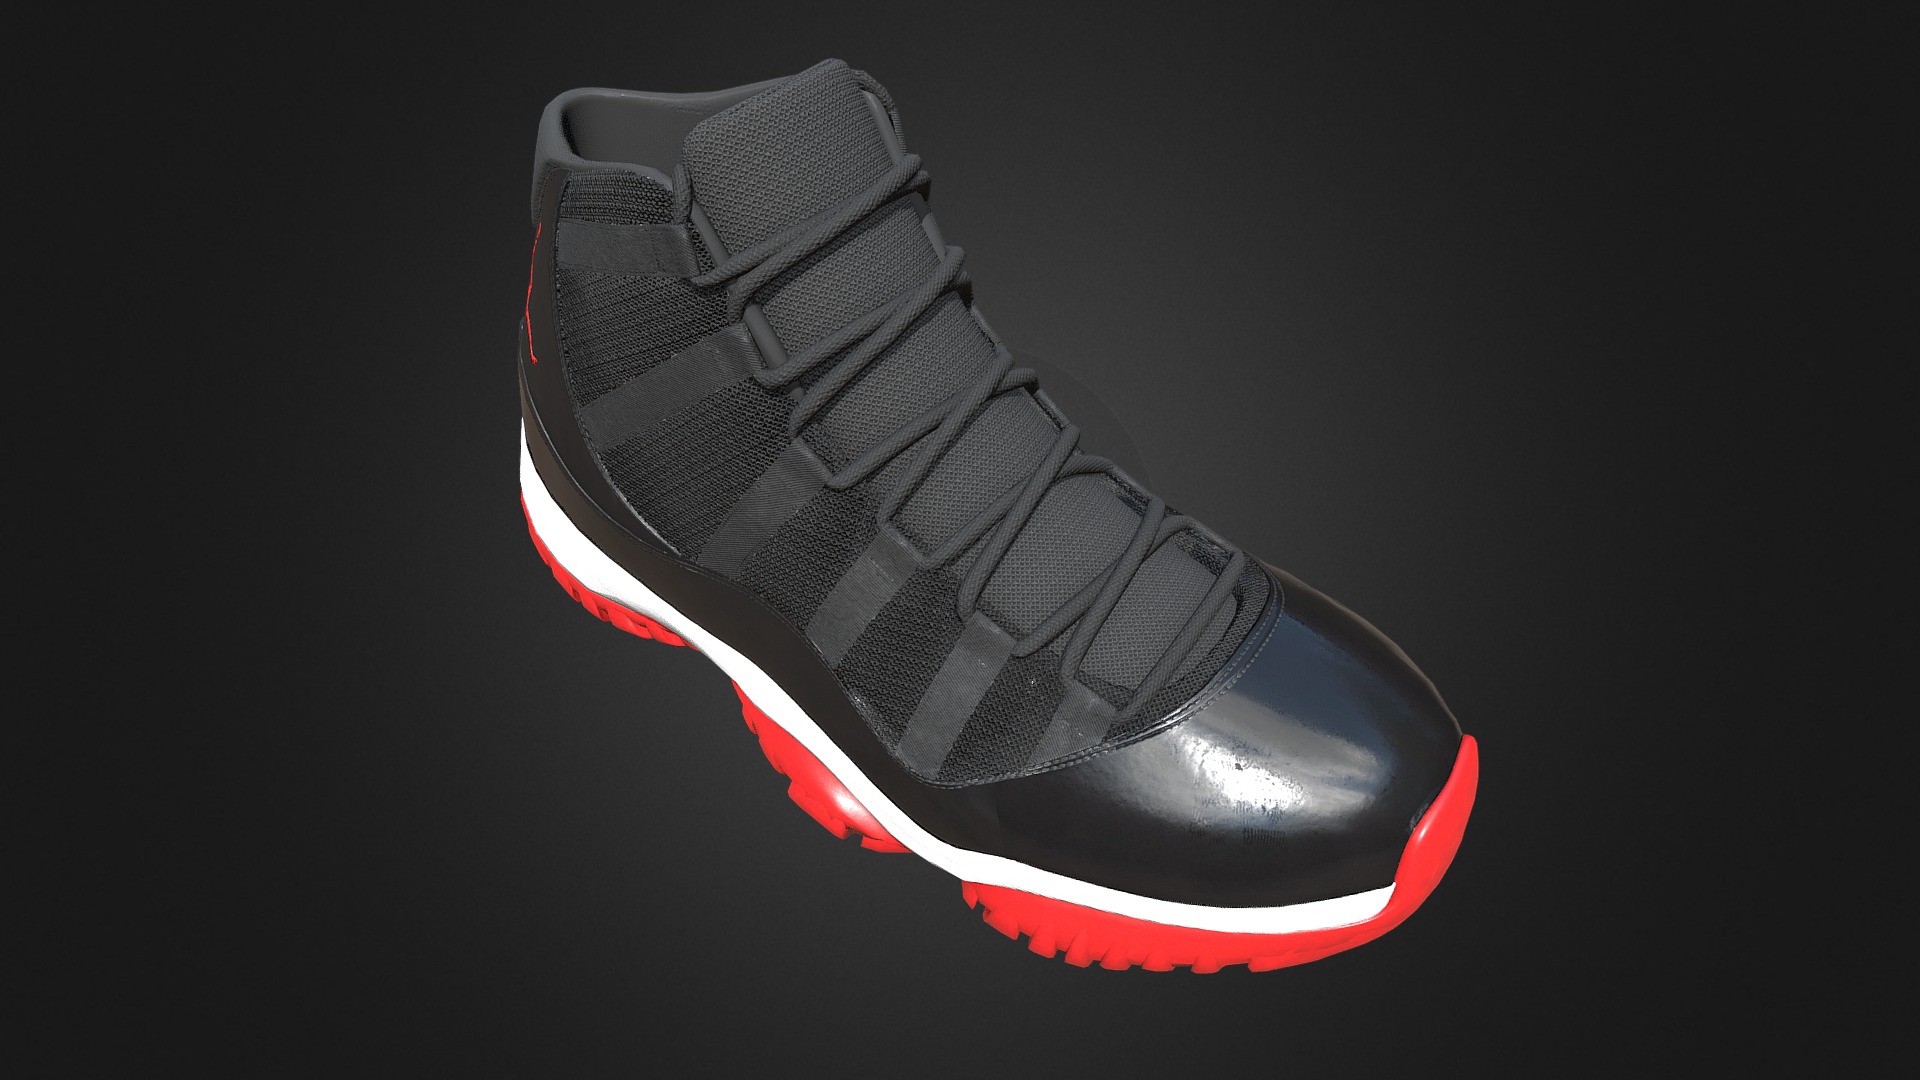 3D model Sneakers Nike Air Jordan 11 Retro - This is a 3D model of the Sneakers Nike Air Jordan 11 Retro. The 3D model is about a black and red shoe.